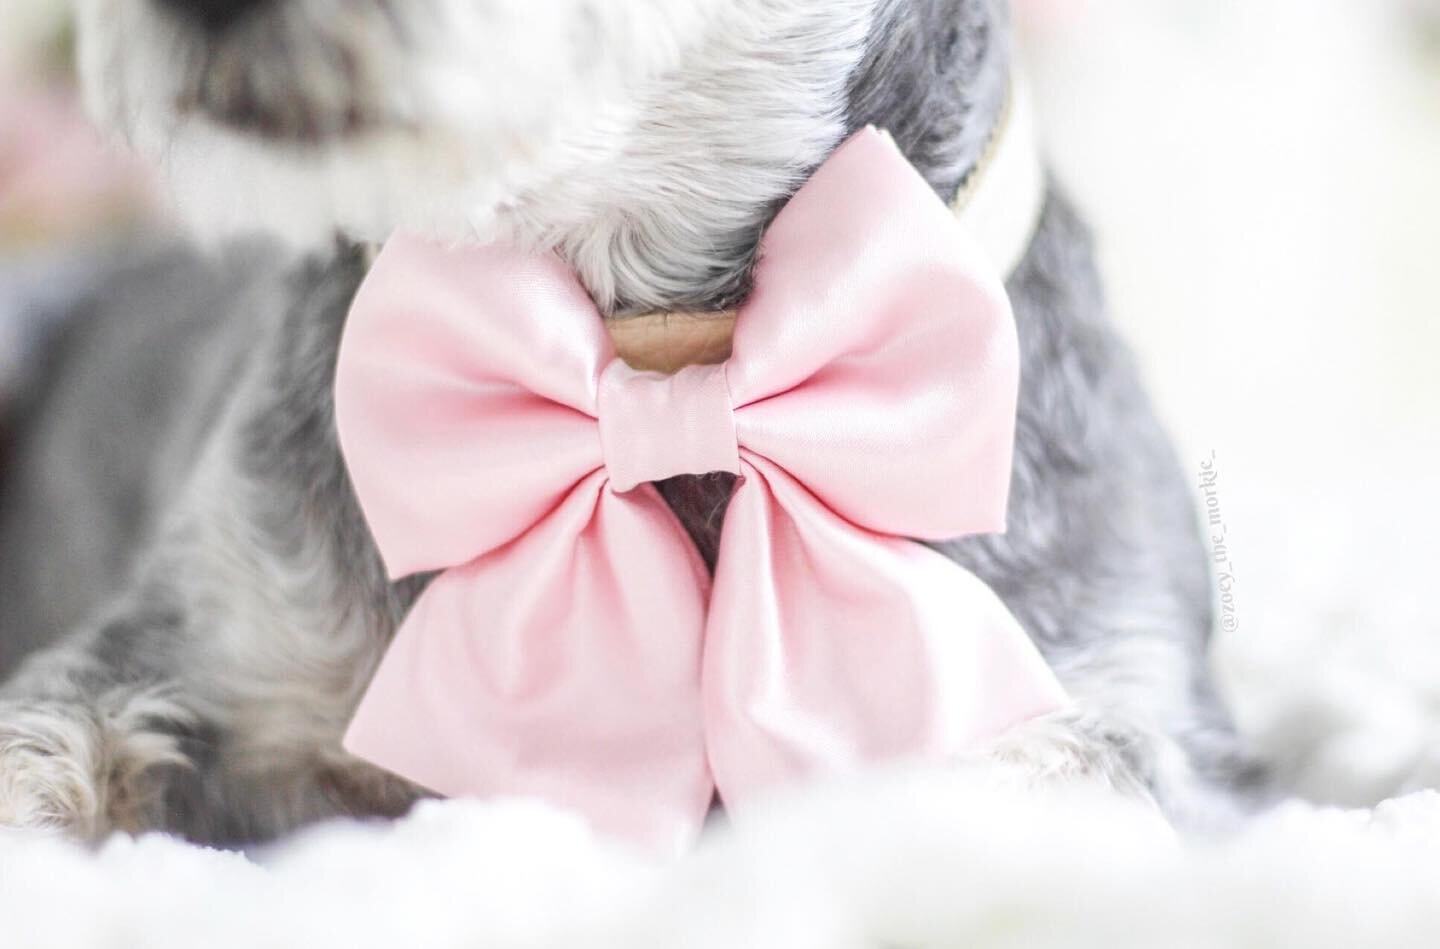 Guess who&rsquo;s pretty muzzle and neck this satin pink bow is on 🤭